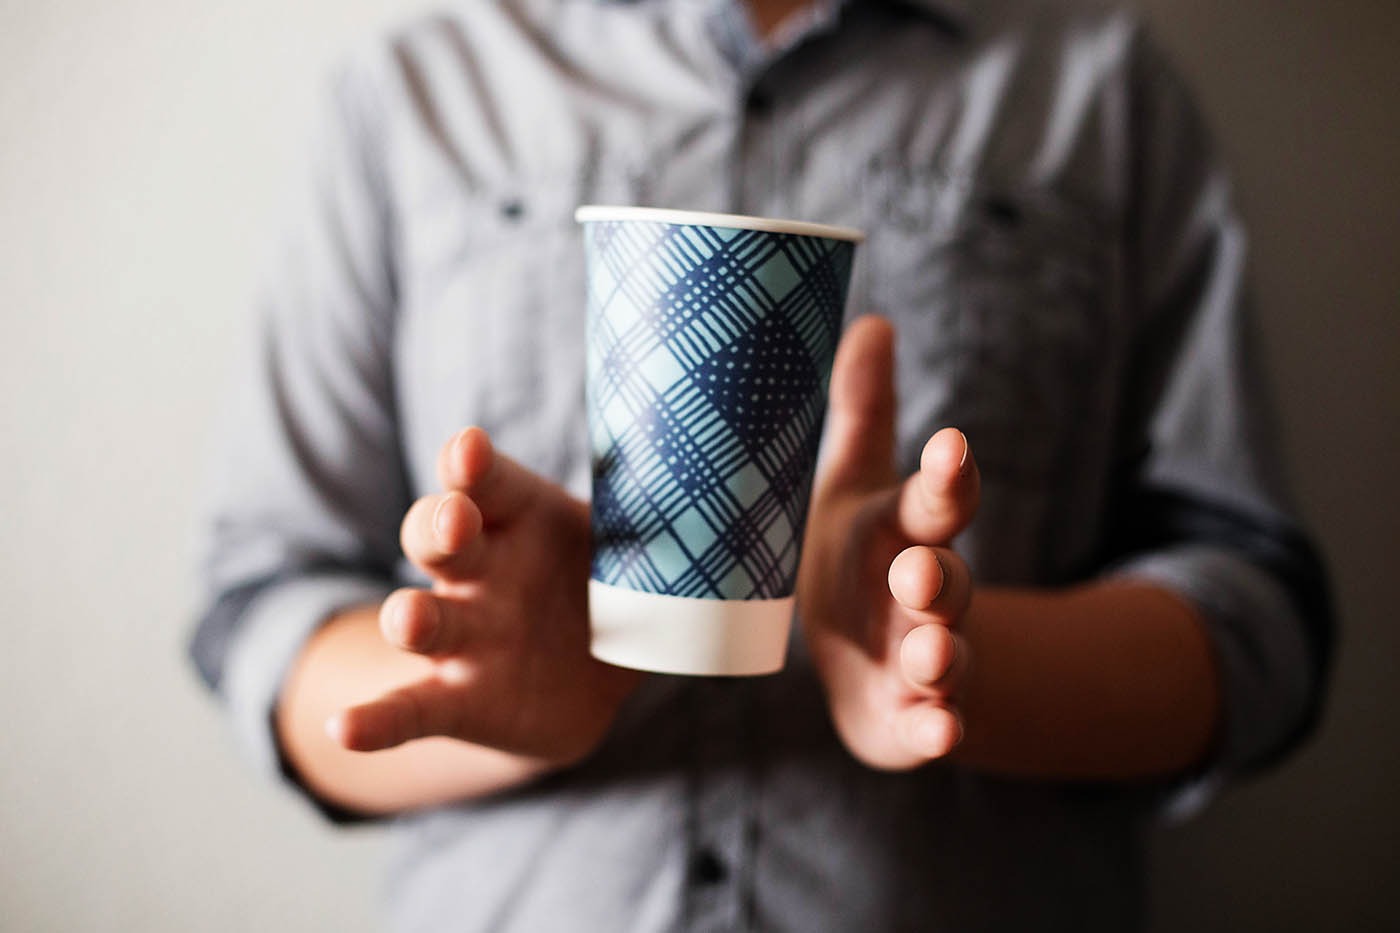 The floating cup illusion captivates observers as the magician seemingly levitates a cup between hands, implying telekinetic control. Starting conventionally, the magician gradually separates hands, revealing the apparent levitation. Although true mid-air levitation remains elusive, this trick, achieved by discreetly poking a hole in a styrofoam cup while distracting the audience, offers an impressive performance suitable for any party. Skillful execution and strategic positioning ensure the audience remains unaware of the trick's mechanics.